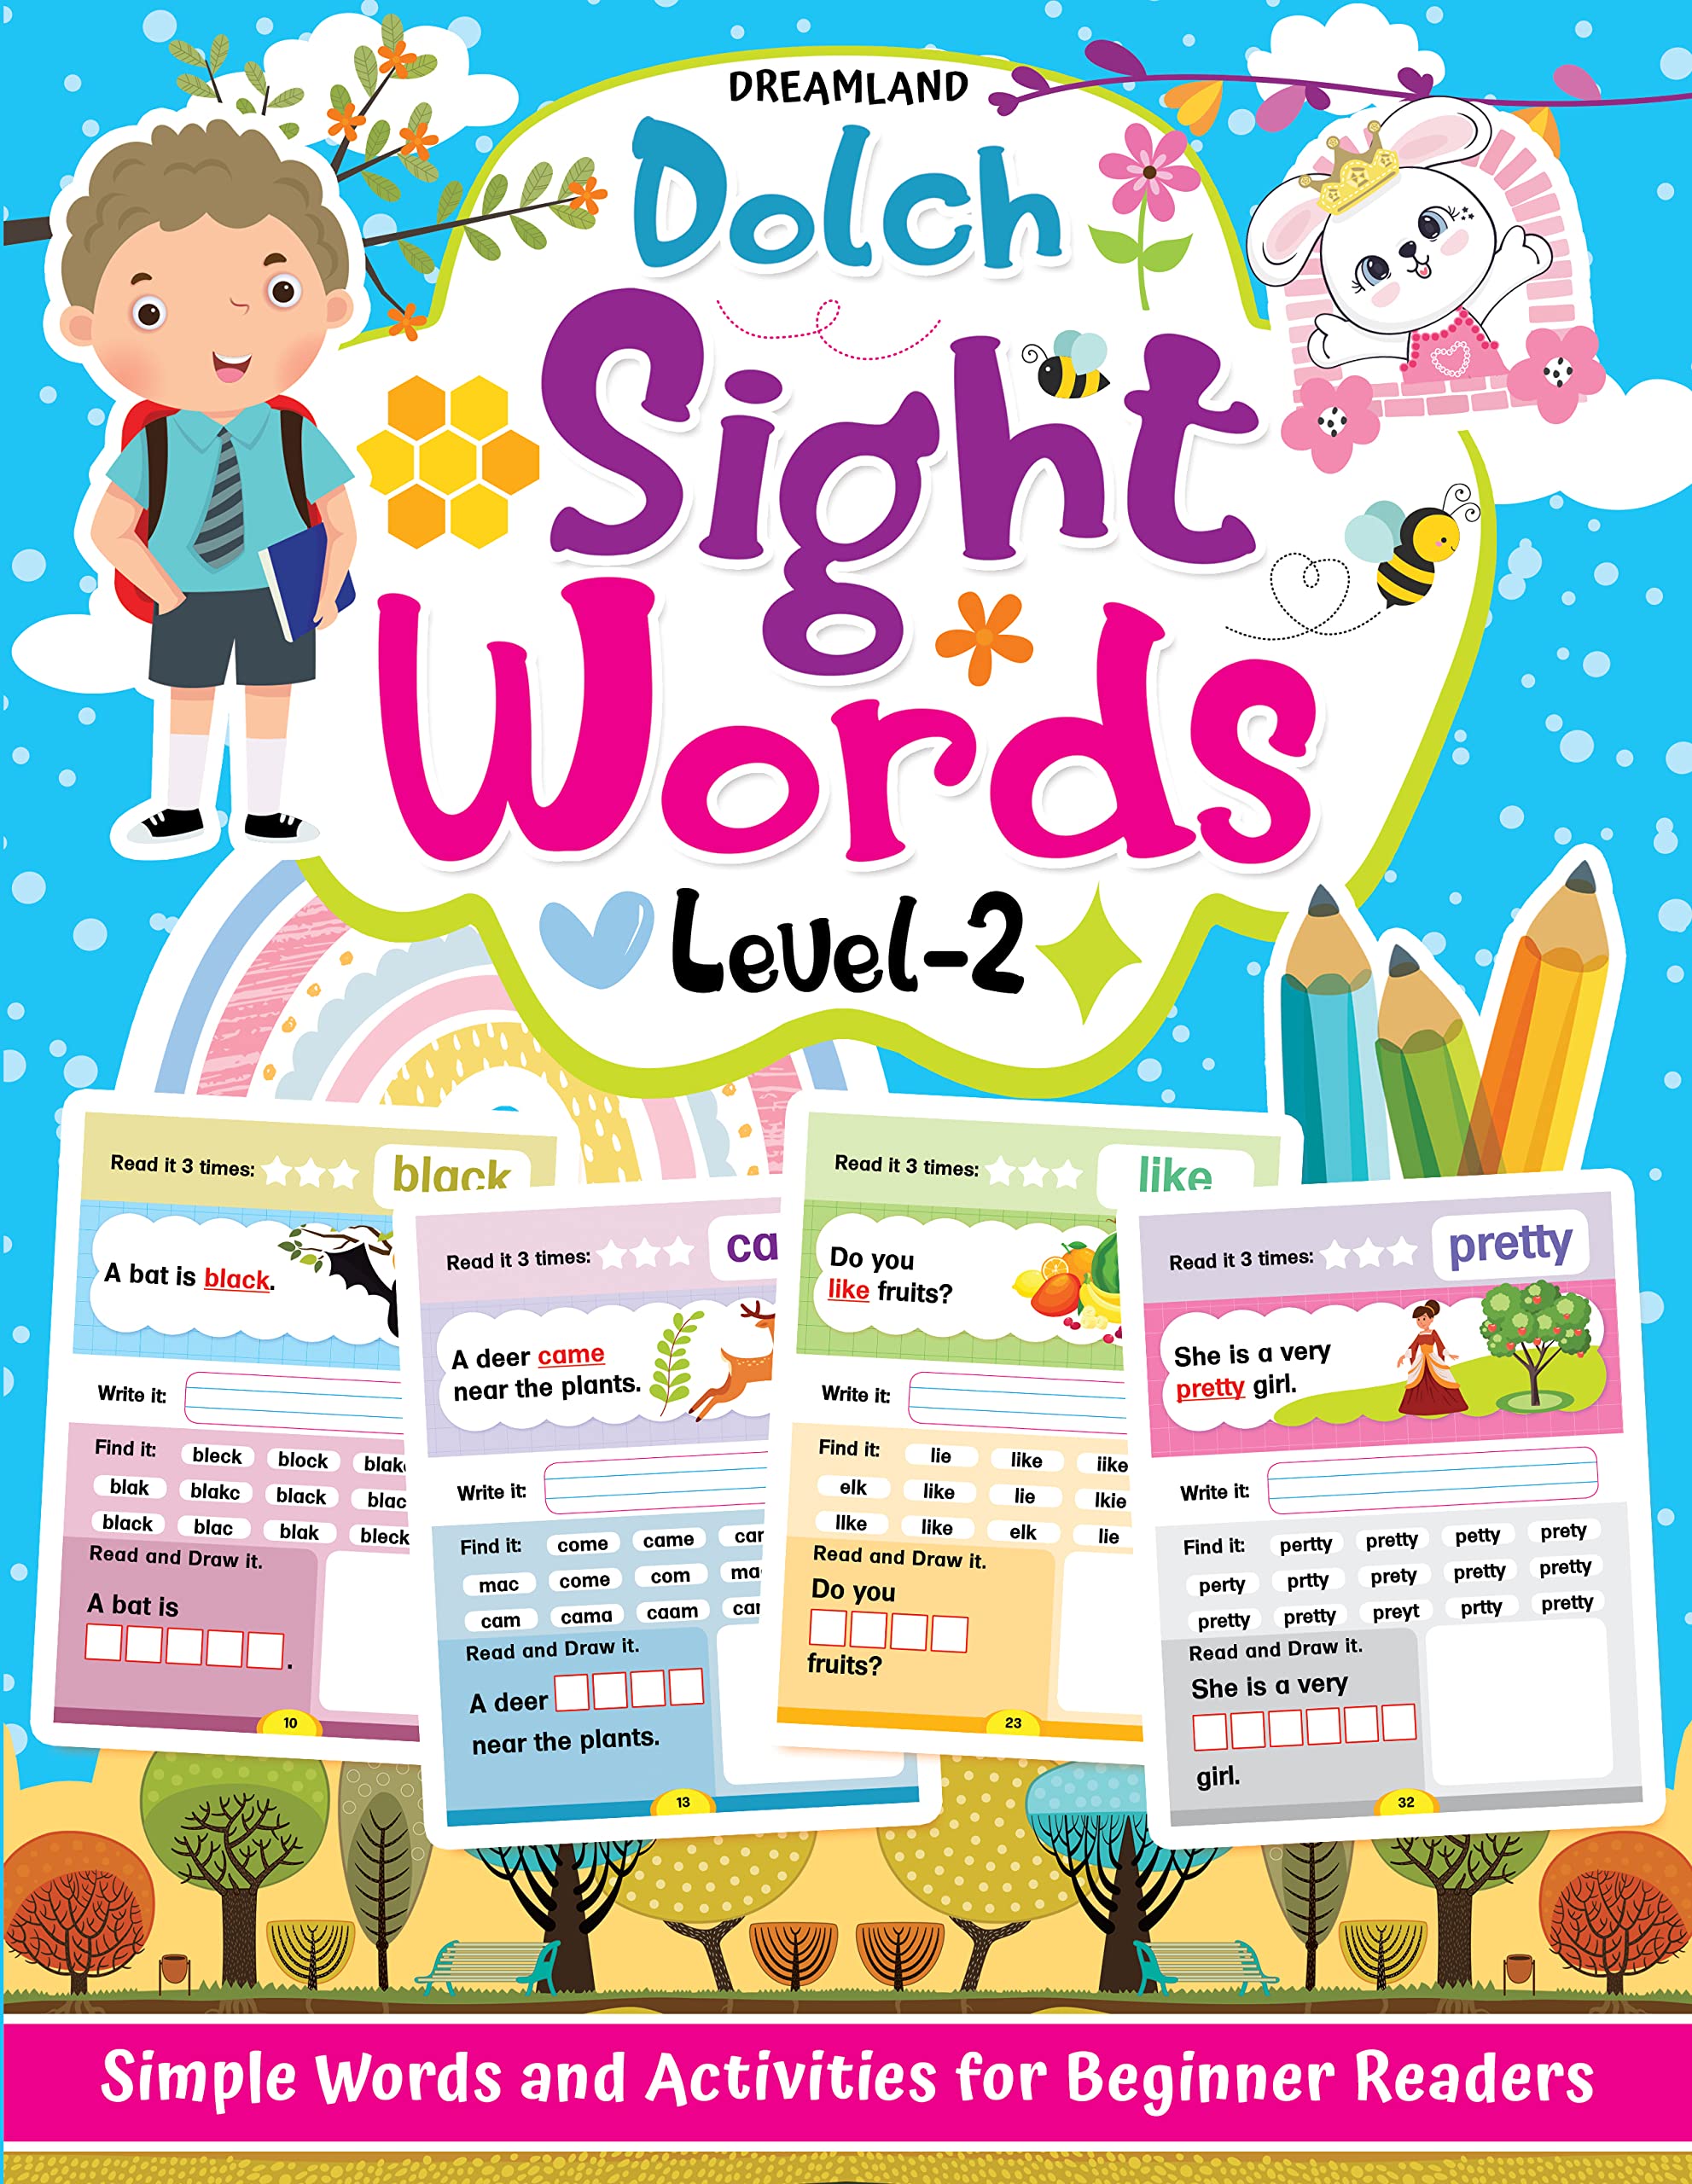 Dolch Sight Words Level 2 for Children Age 4 -8 Years